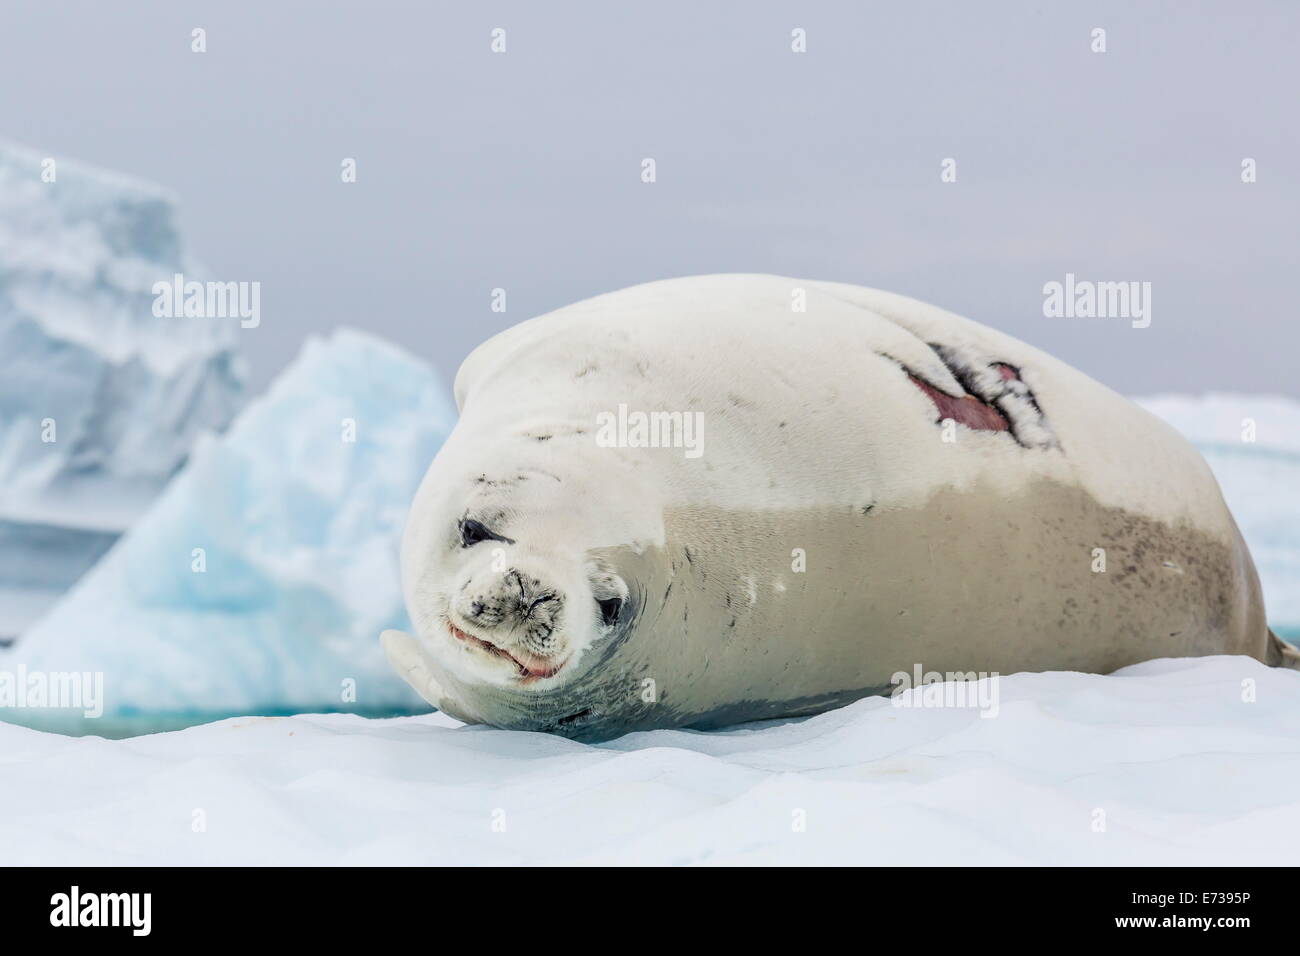 Adult crabeater seal with fresh wound hauled out on ice floe, Neko Harbor, Andvord Bay, Antarctica, Southern Ocean Stock Photo